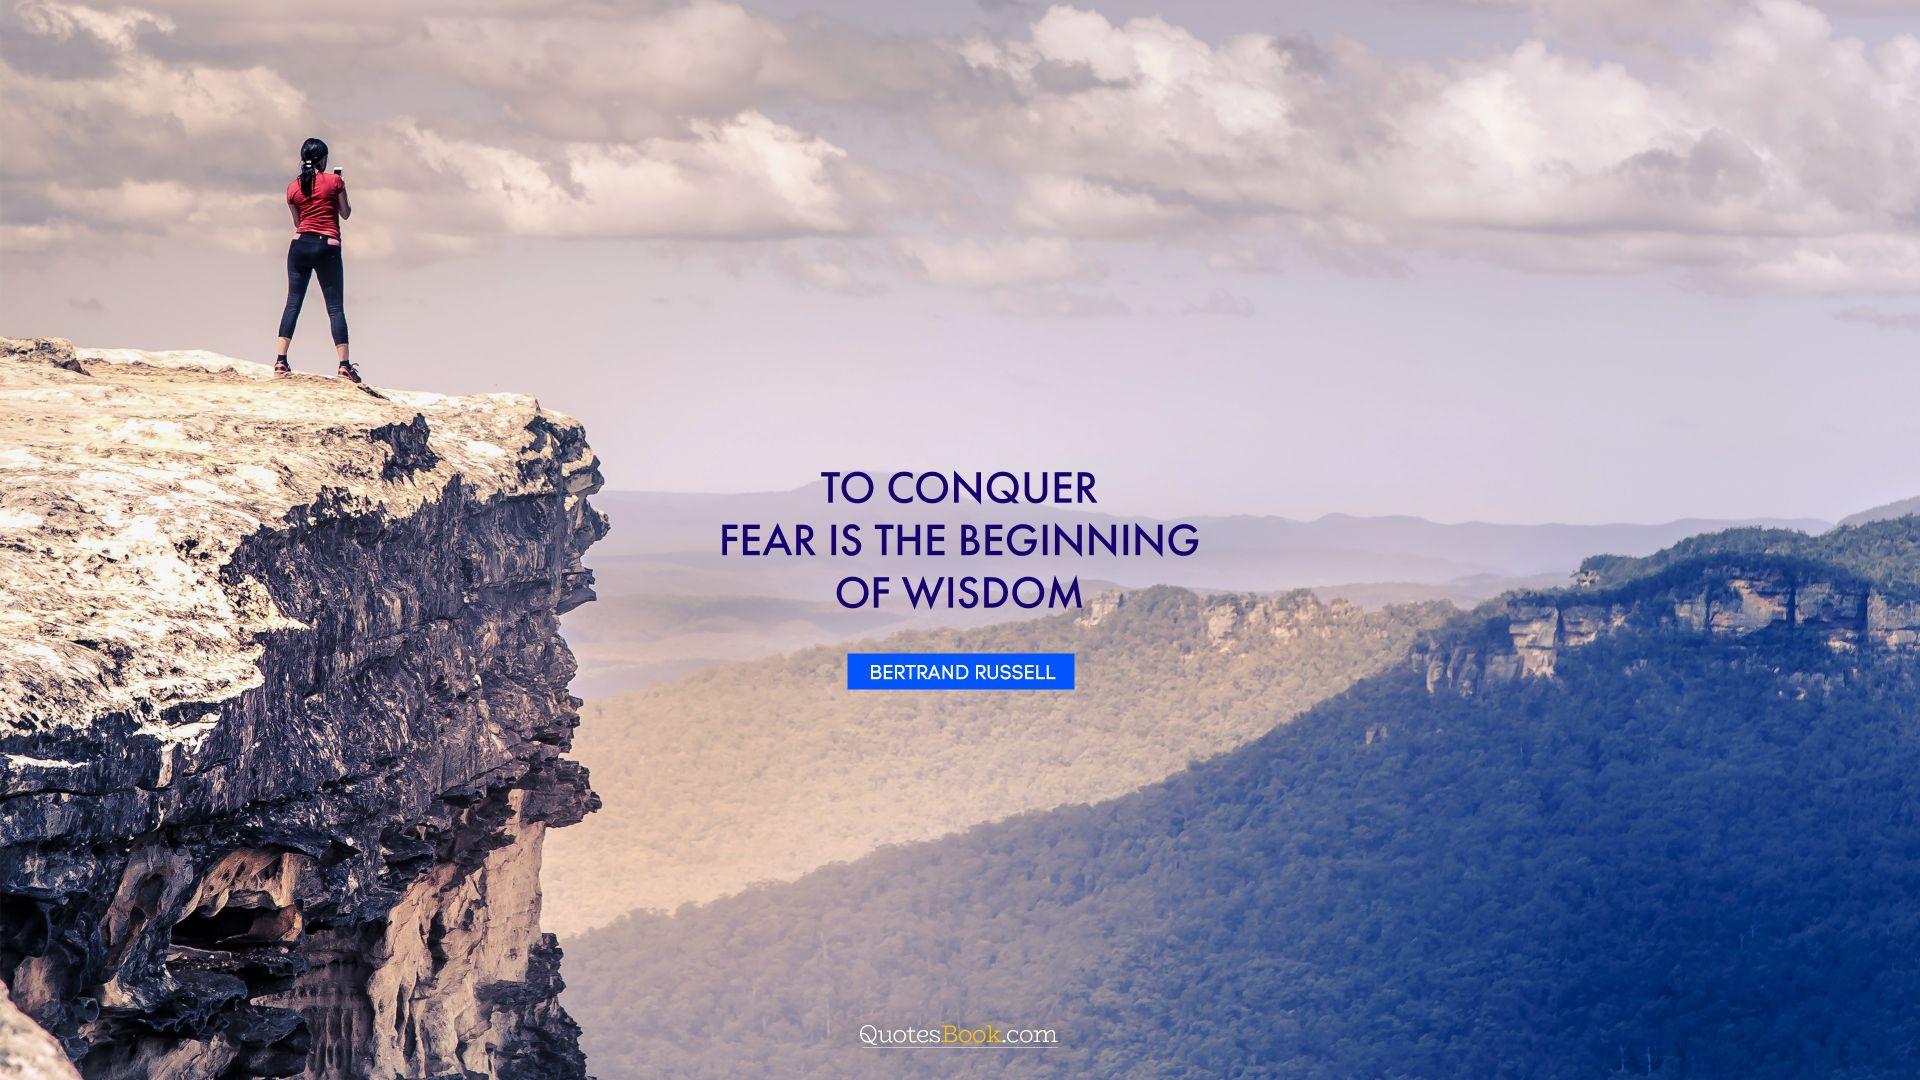 To conquer fear is the beginning of wisdom. - Quote by Bertrand Russell